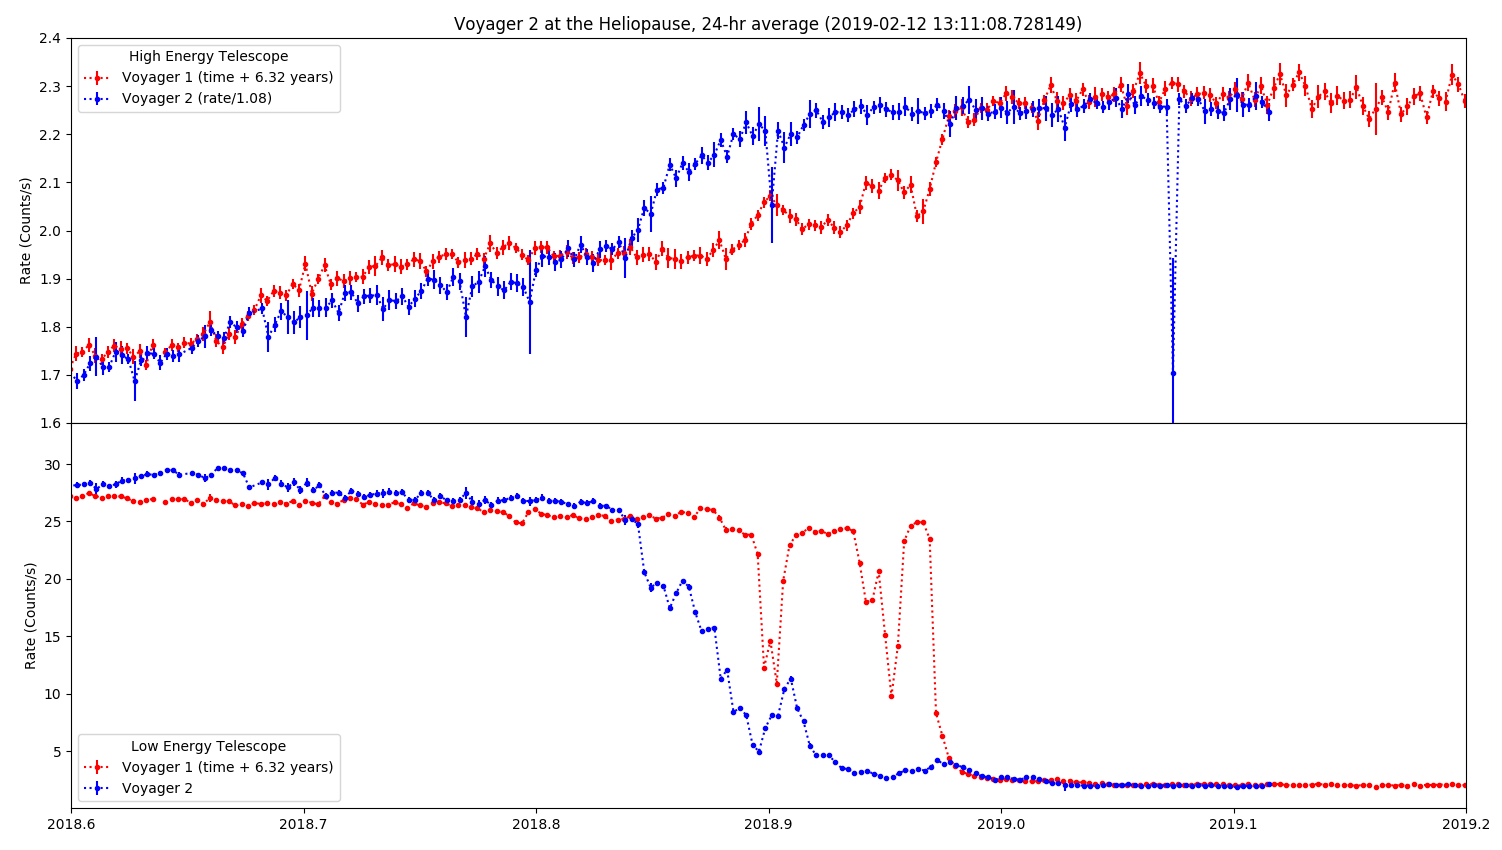 Charts from CRS instruments on Voyager 1 and Voyager 2, showing mostly flat lines that become much more variable around 2018.9.